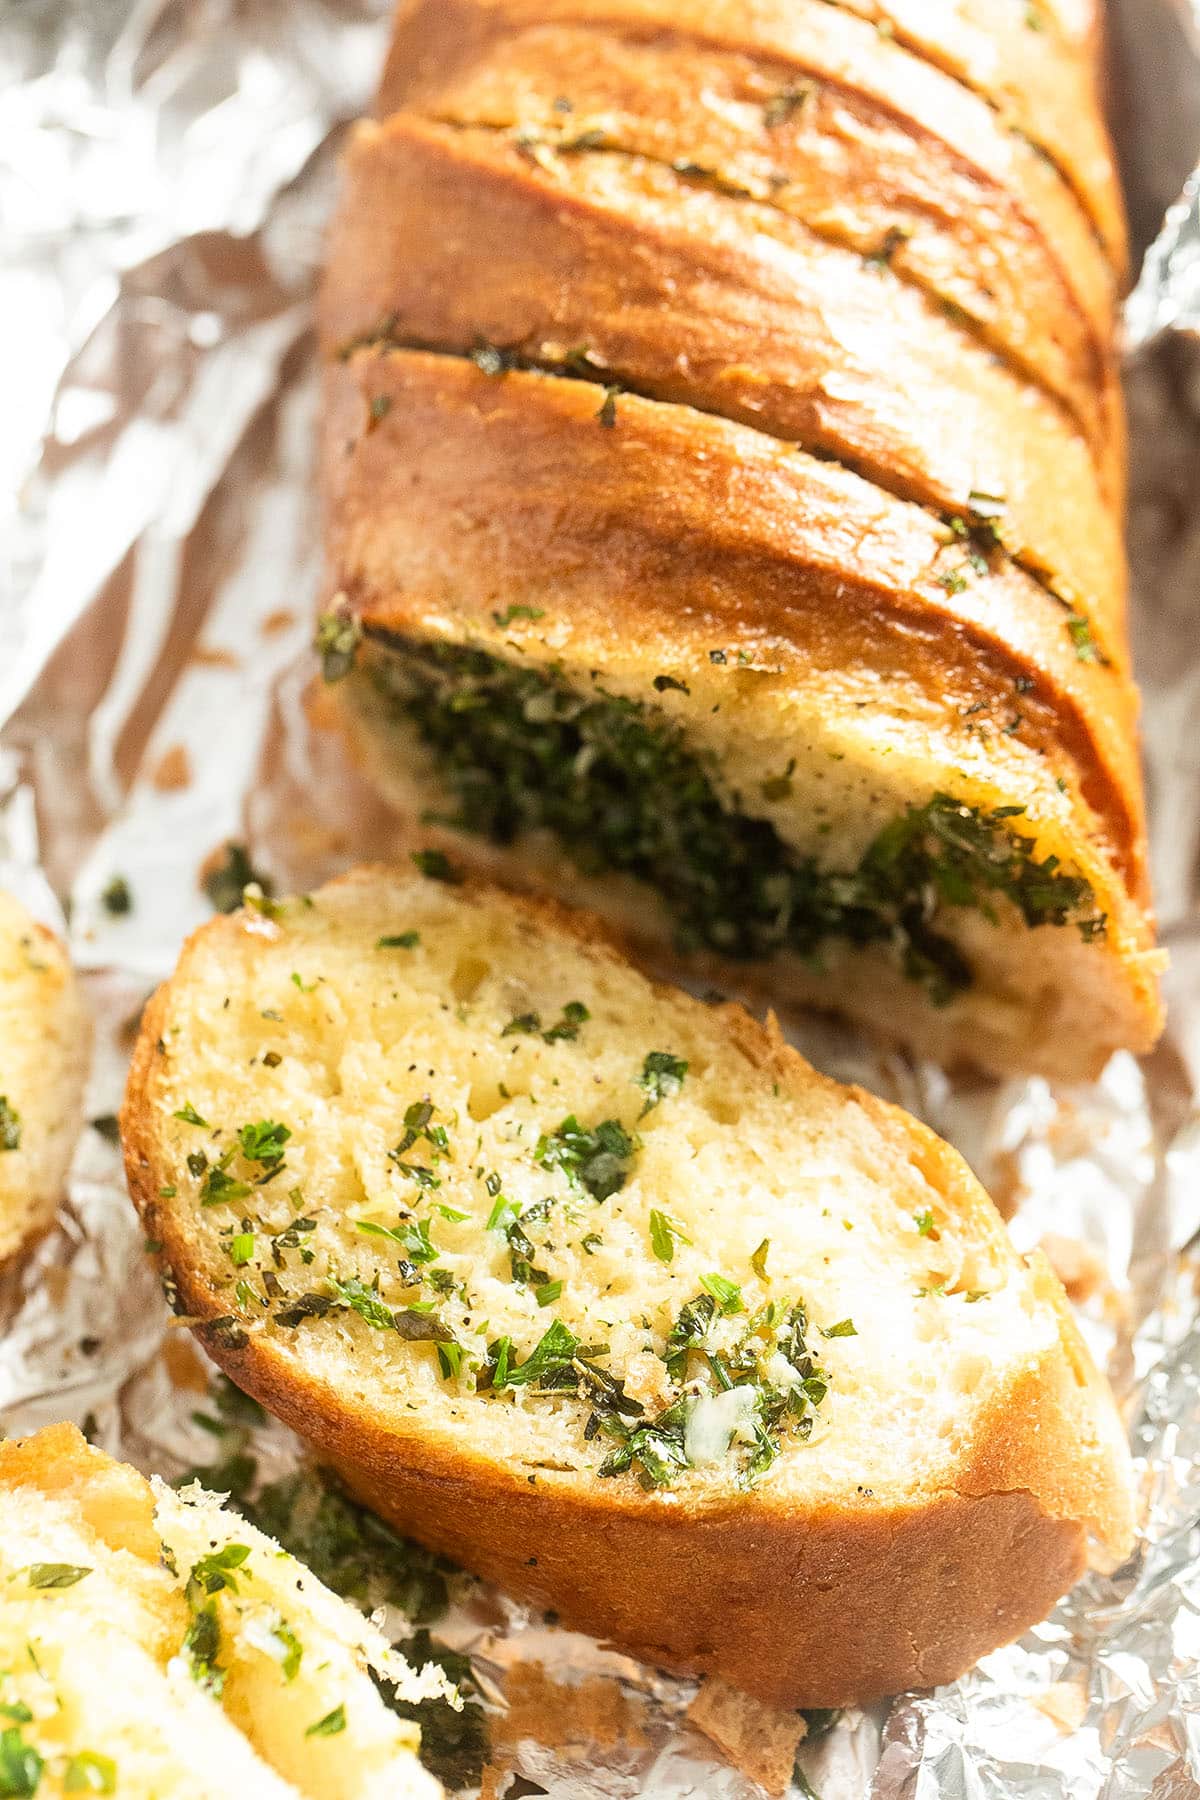 garlic bread made with baguette, garlic and fresh herbs sliced on foil.